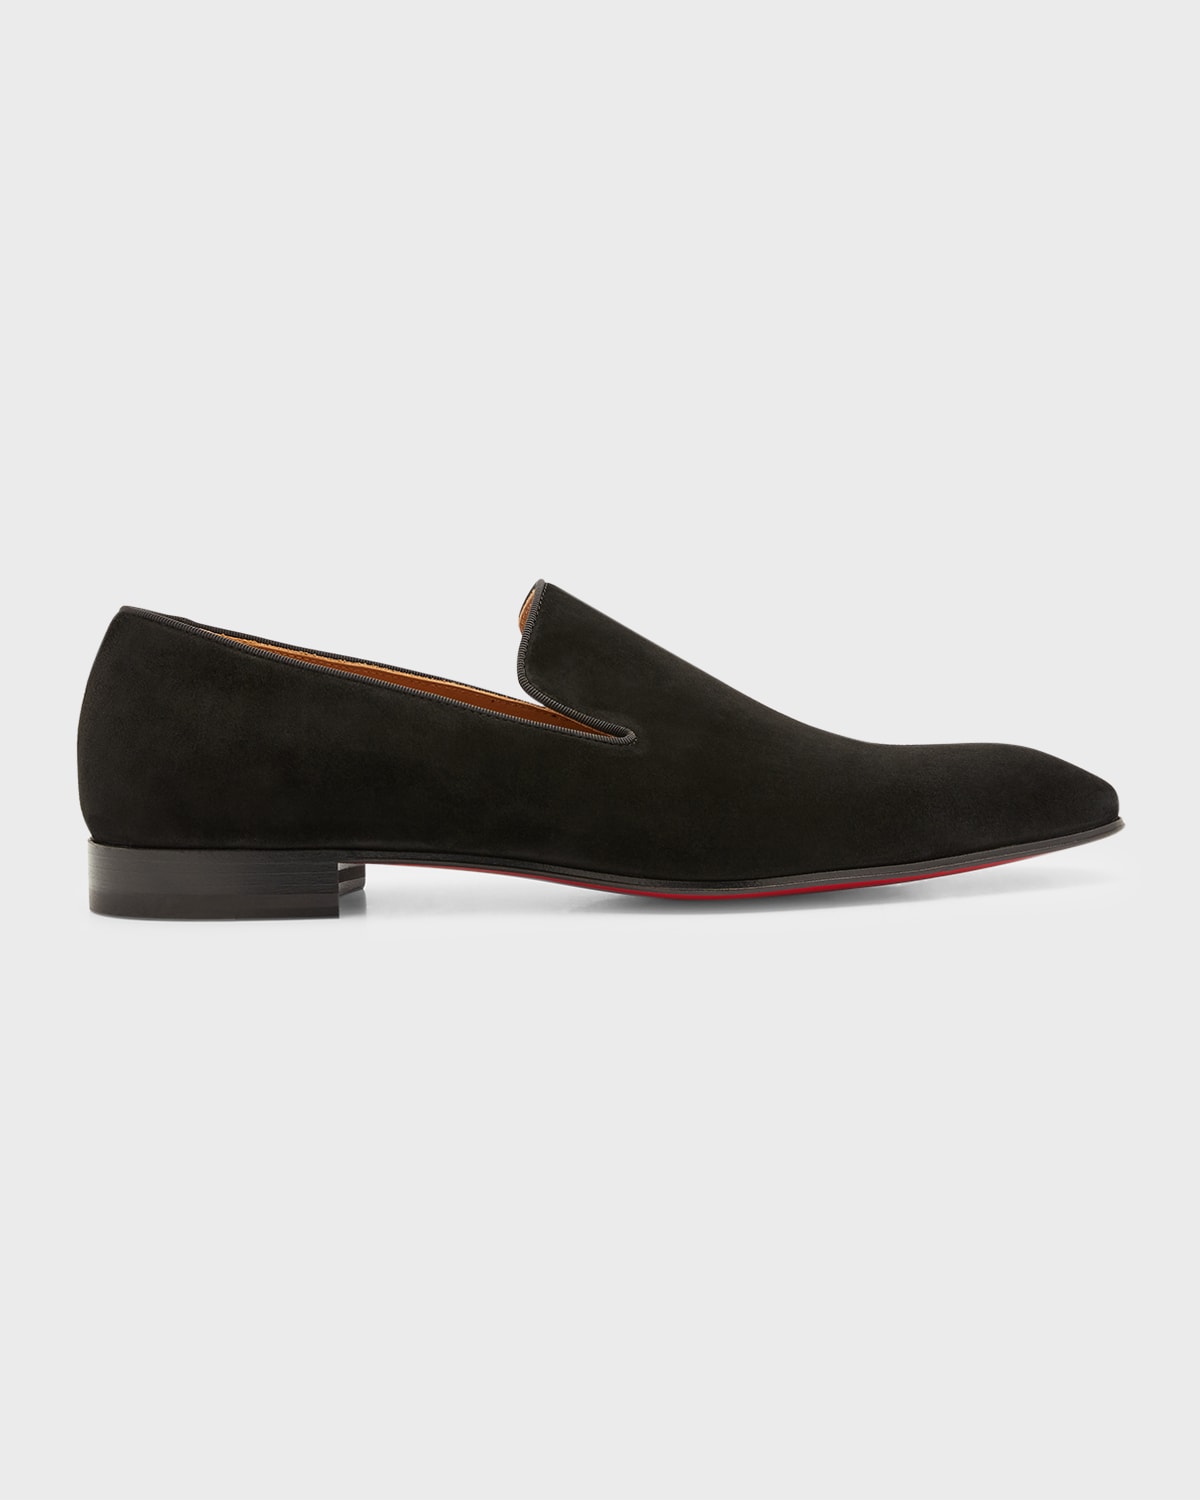 Christian Louboutin Men's Our Georges Suede Loafer